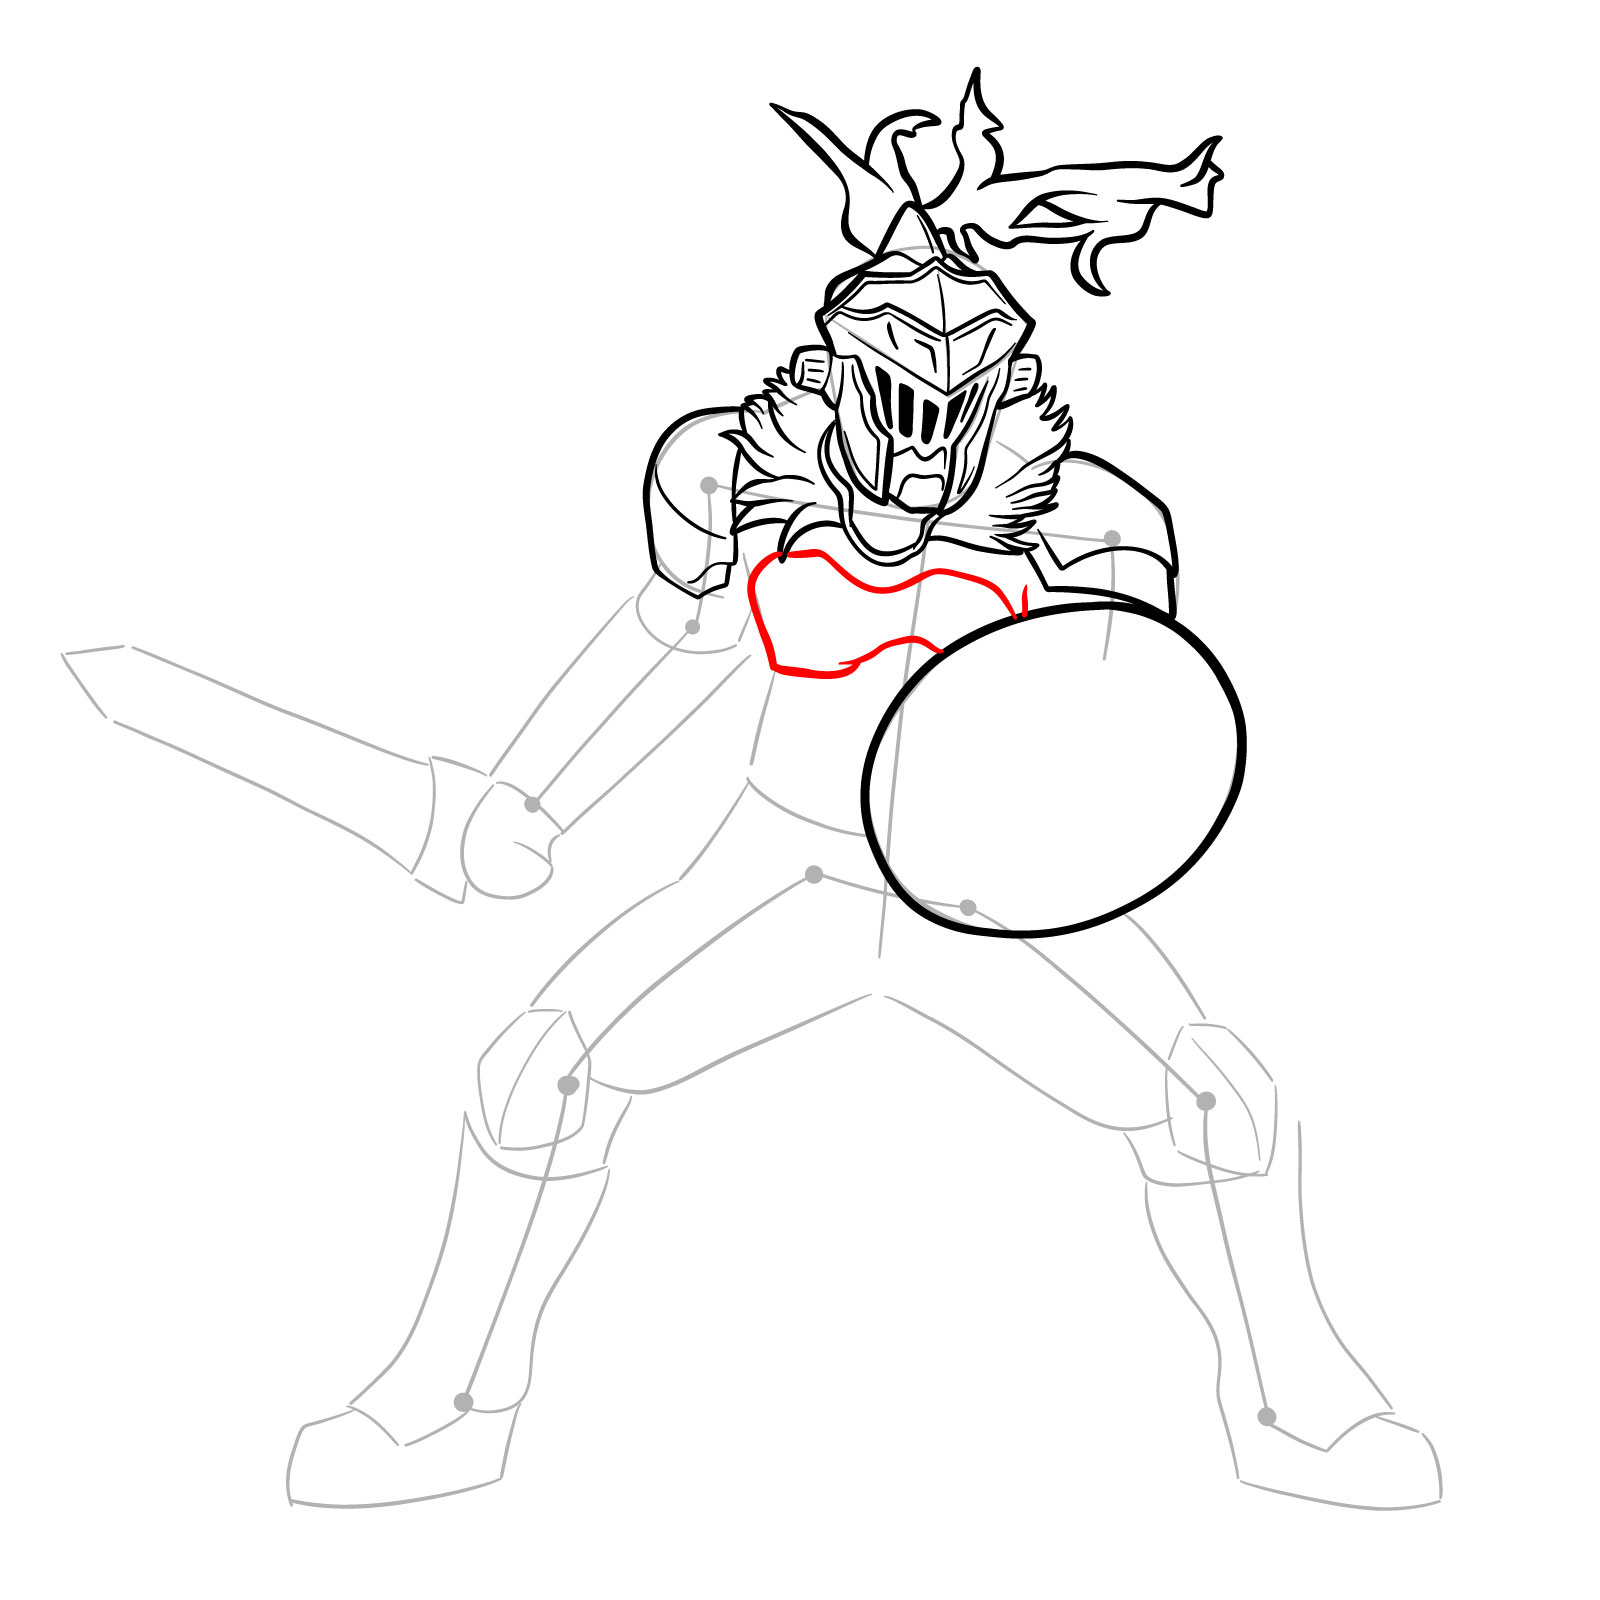 How to Draw Goblin Slayer in battle stance - step 17